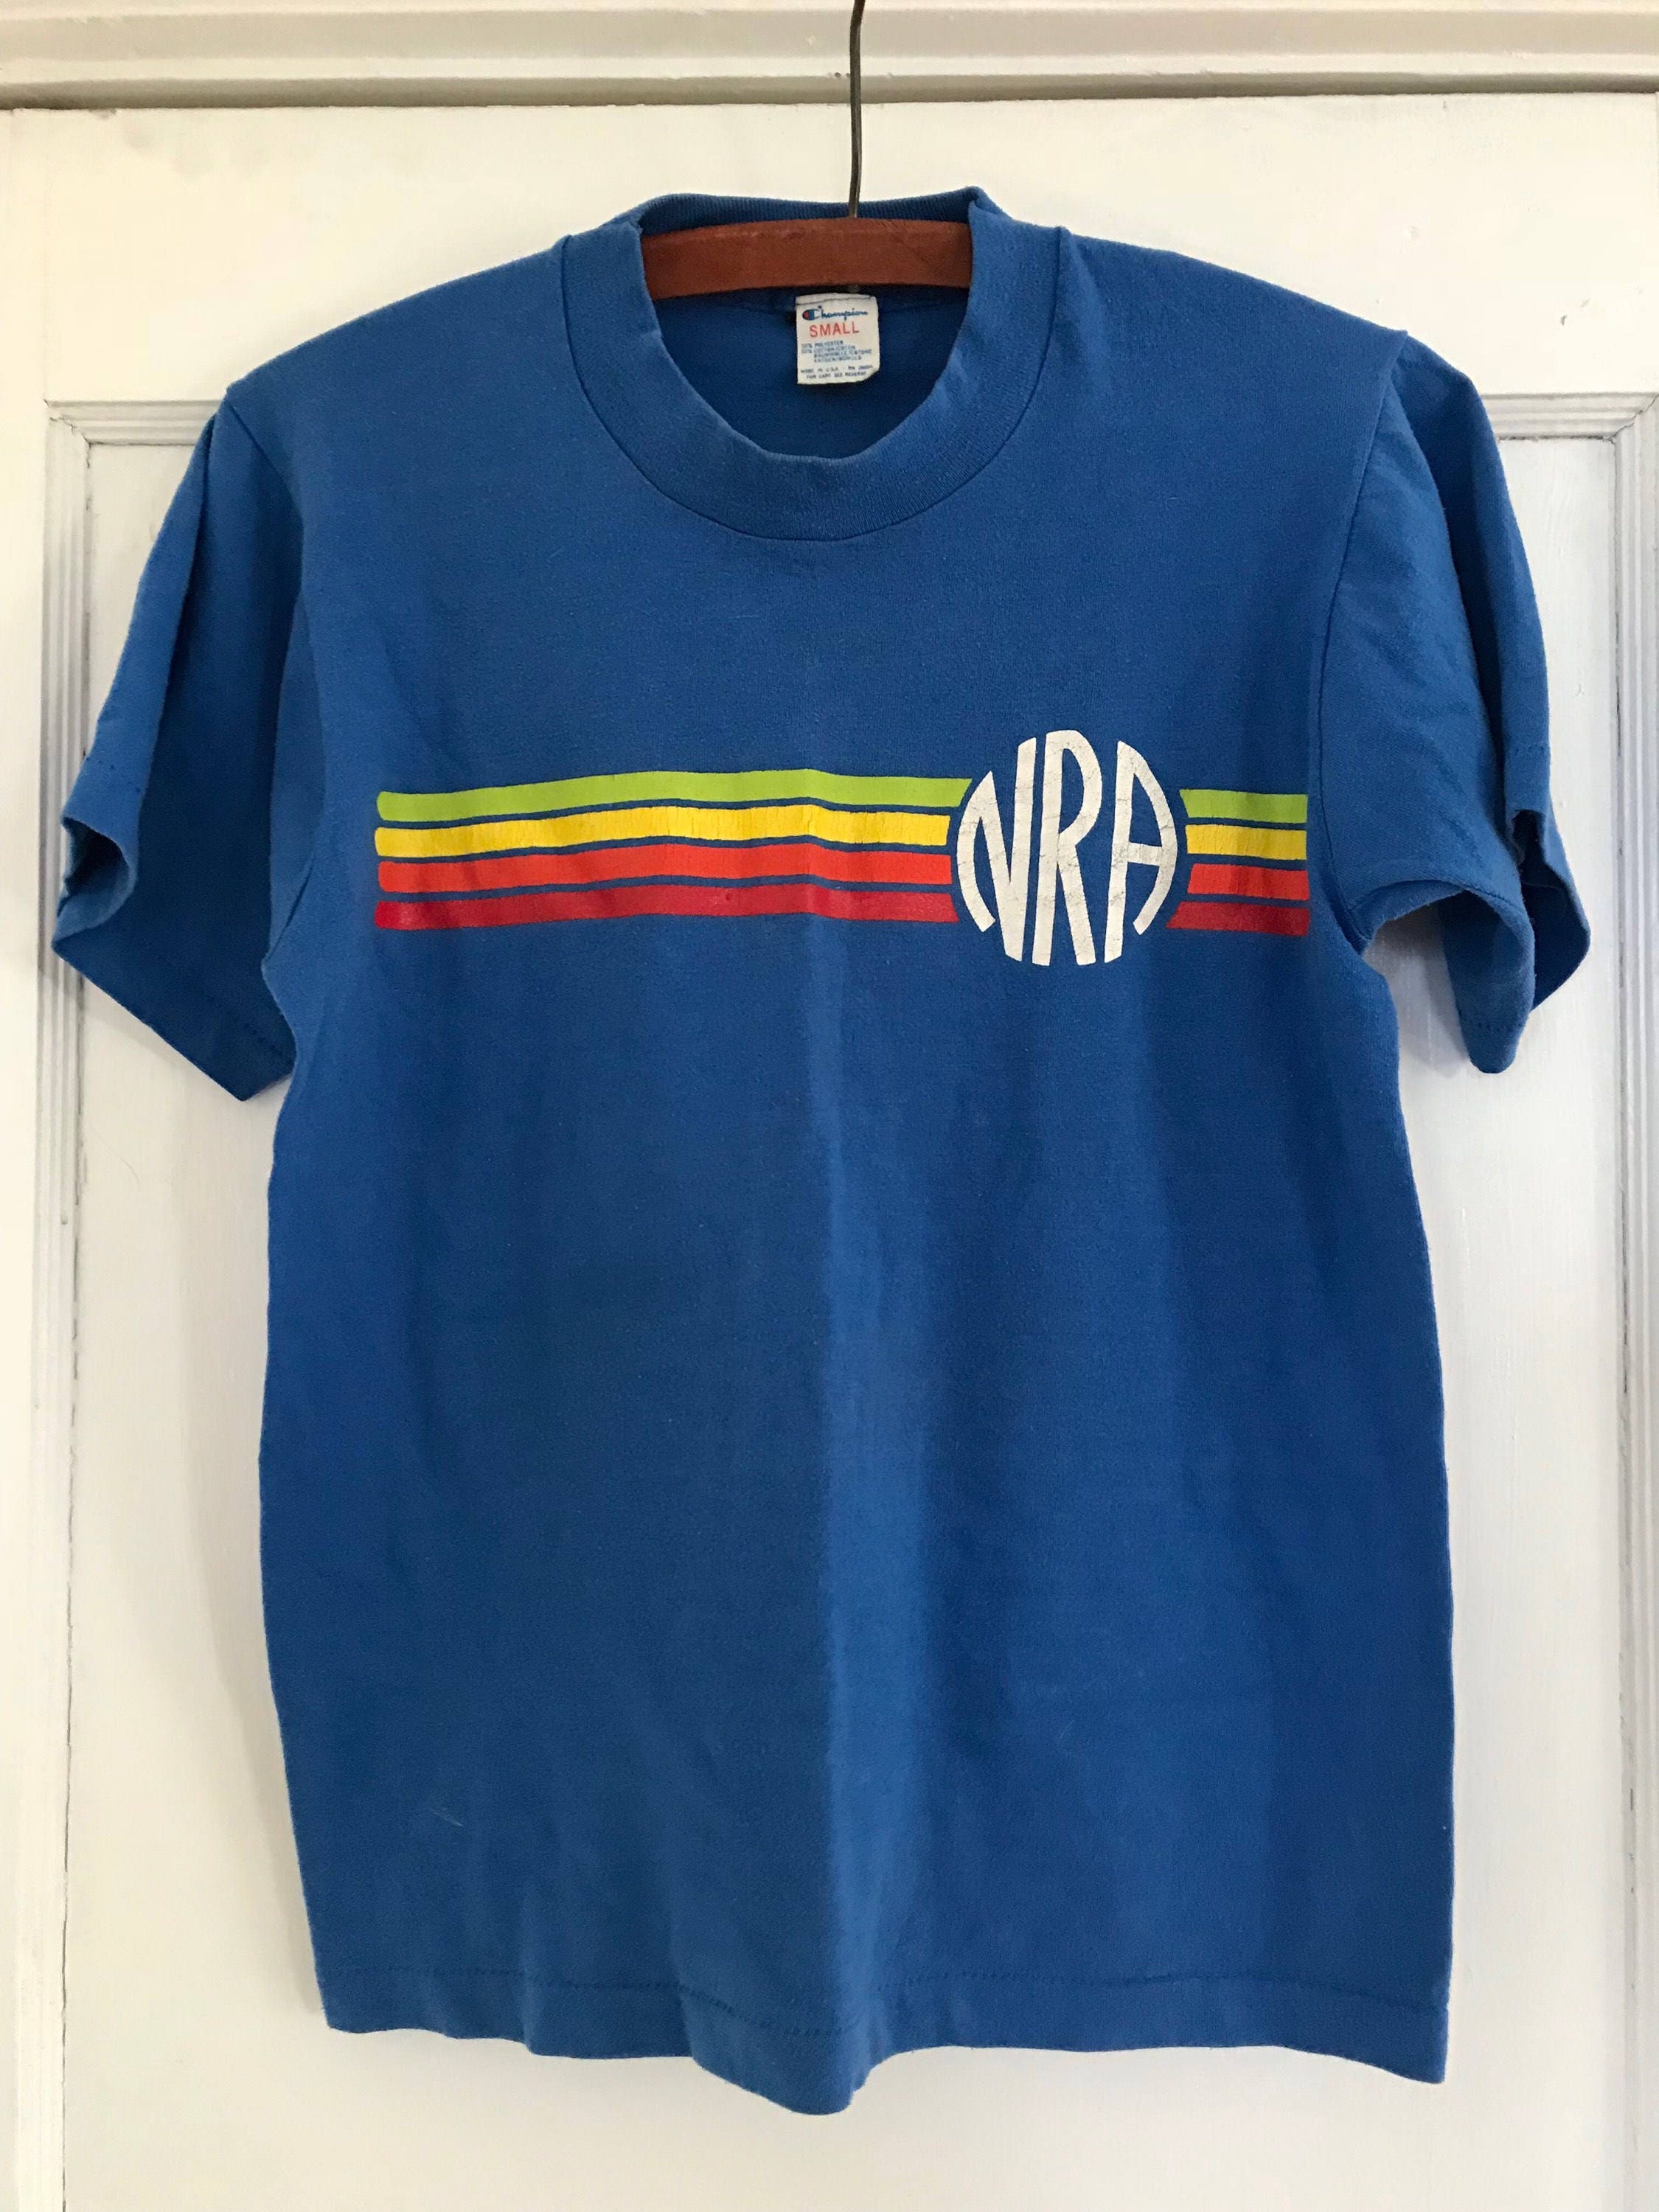 Vintage NRA t-shirt blue with rainbow print | Etsy